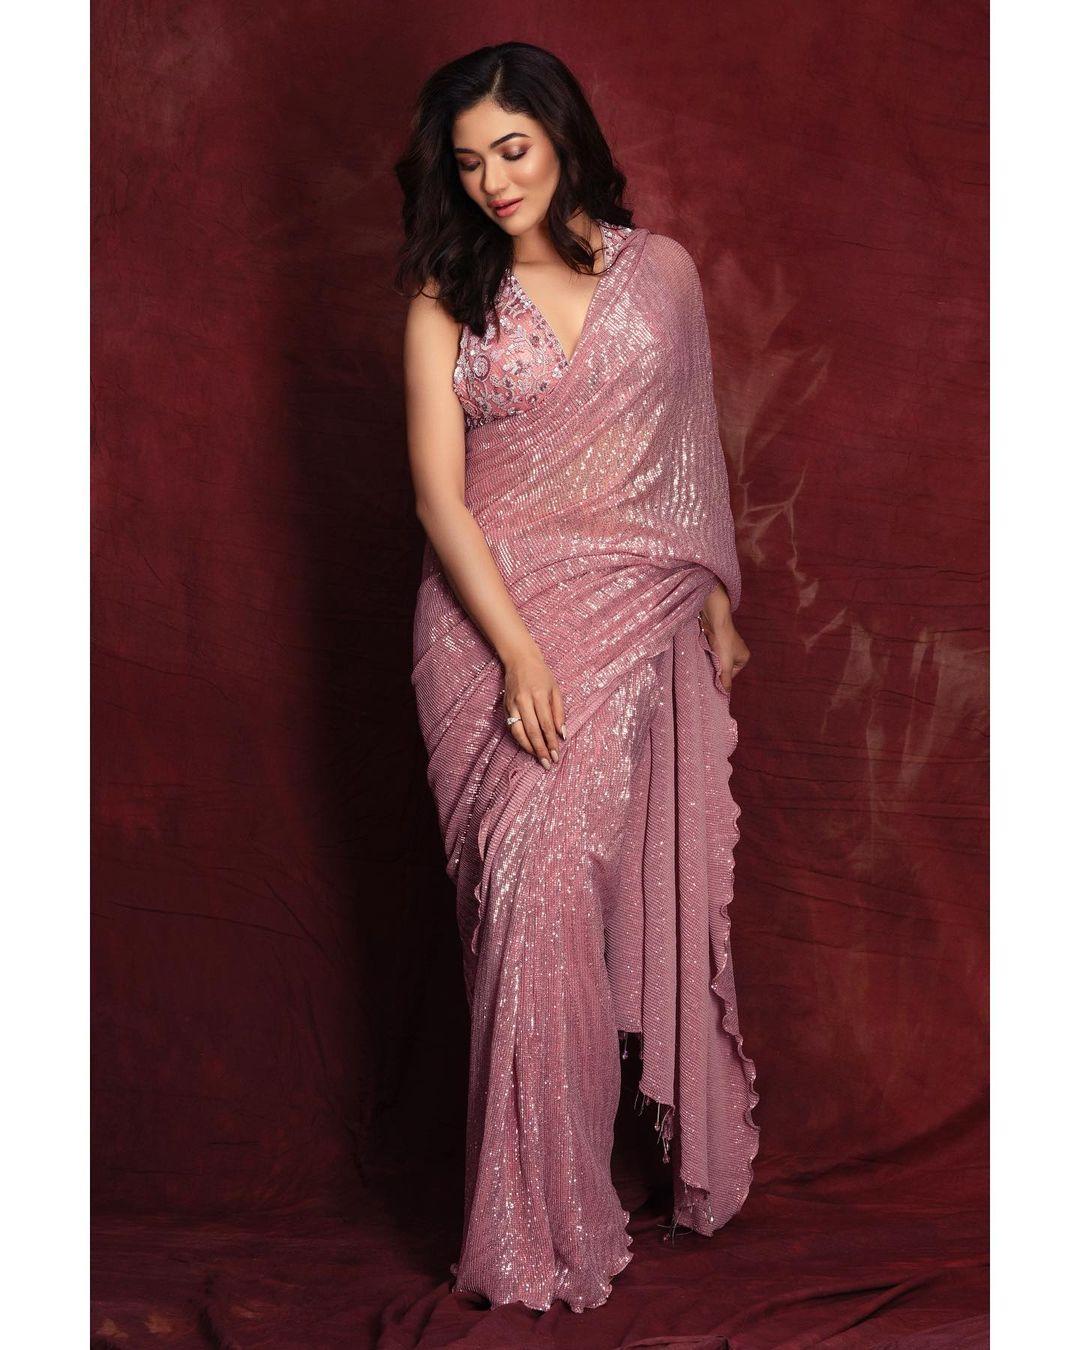 Planning to make a reel that you want to trend? Worry not, we have got you an ideal Gulabi saree of Ridhima Pandit, which will be perfect for your reel fit'